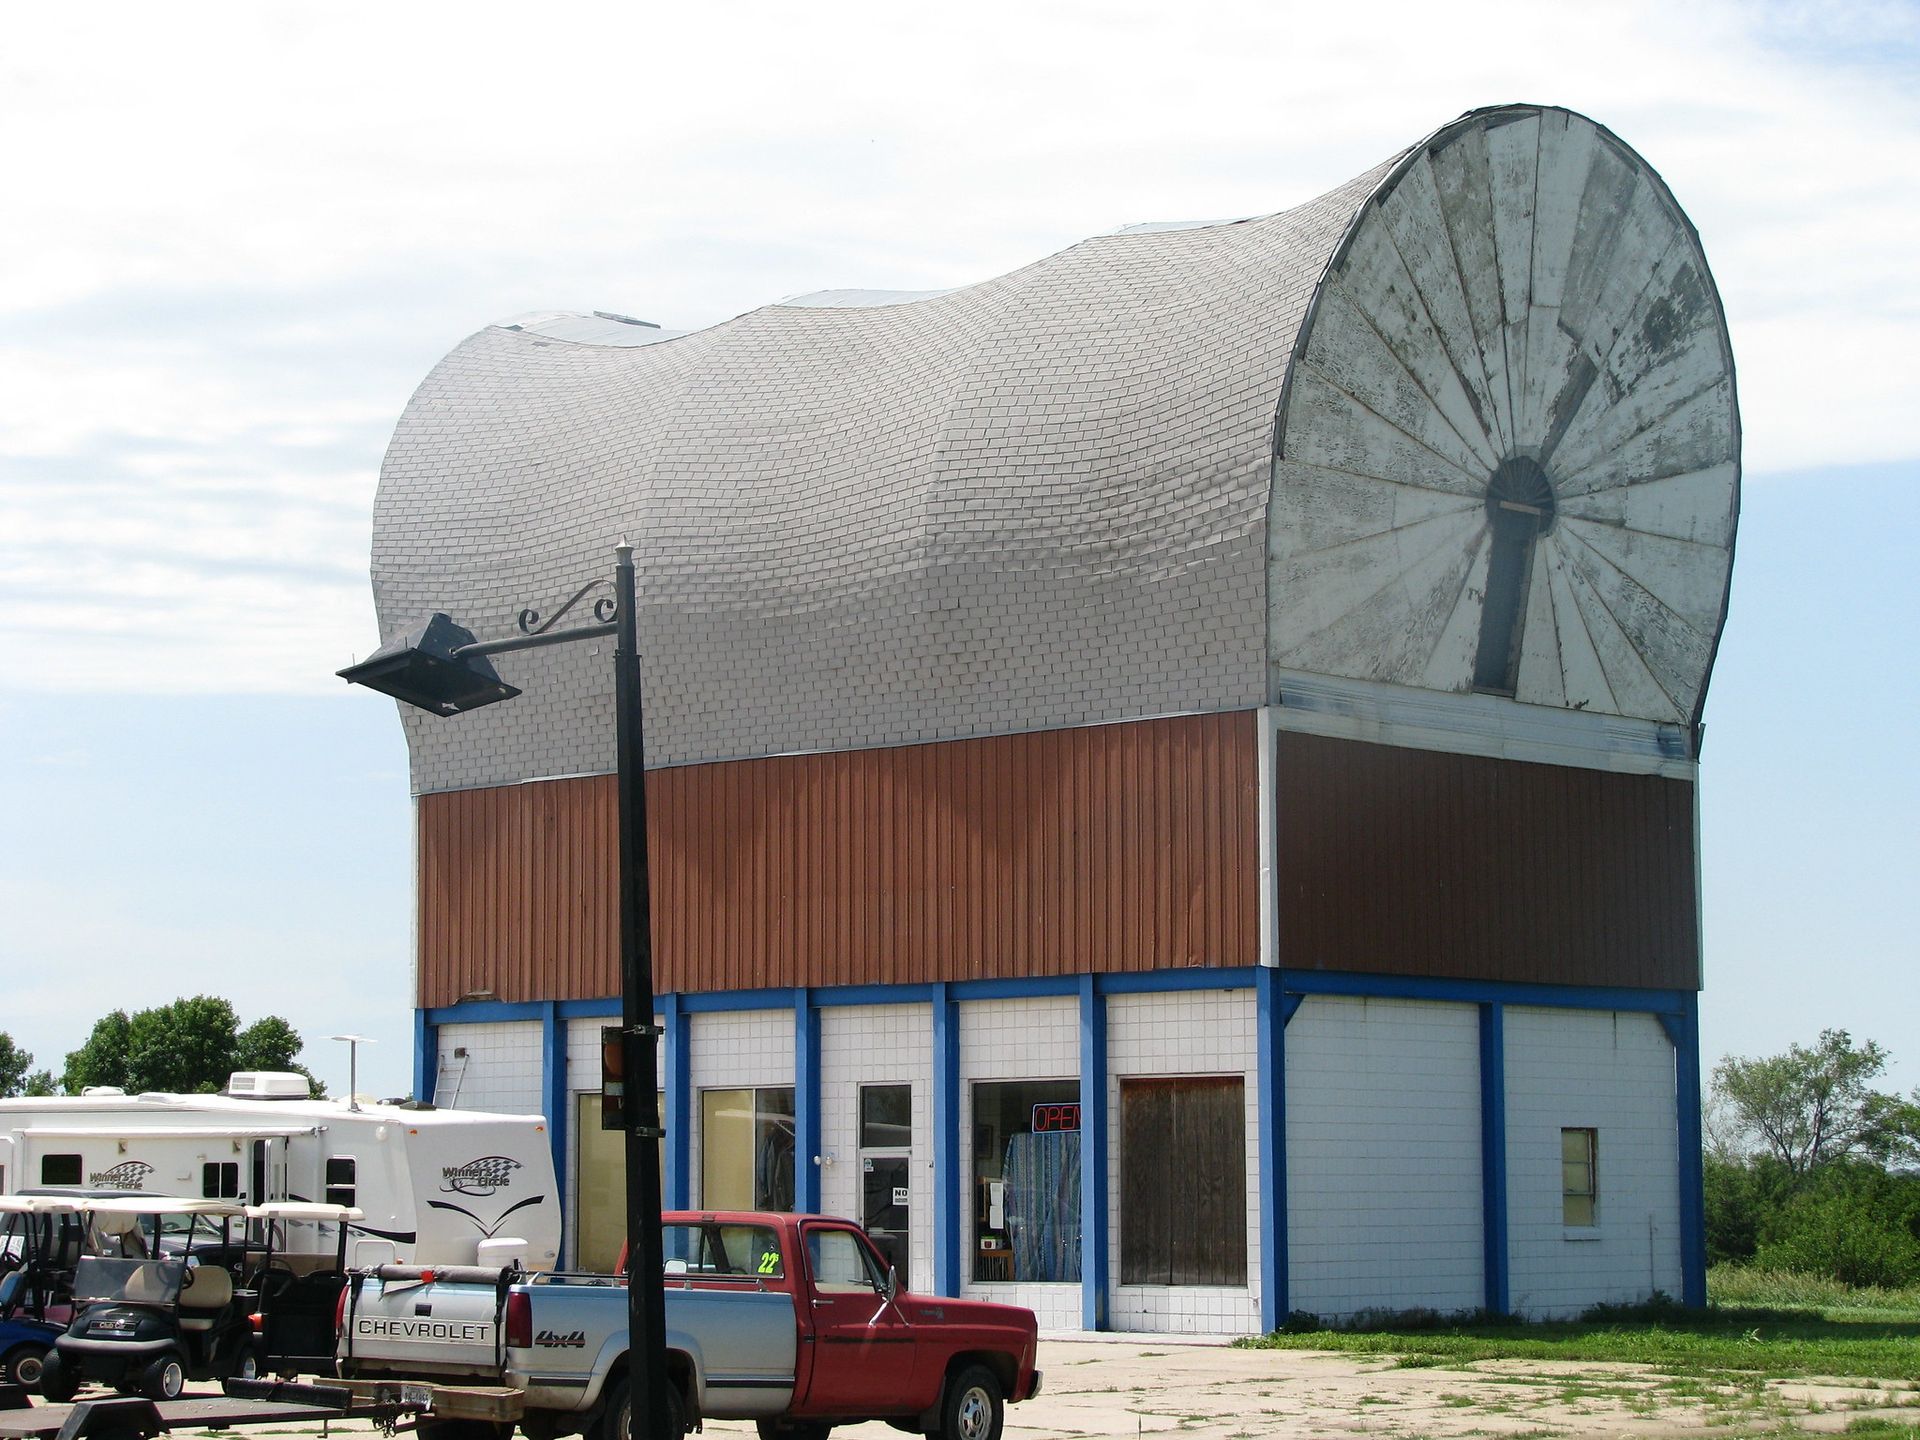 World’s Largest Covered Wagon, a world record in Milford, Nebraska